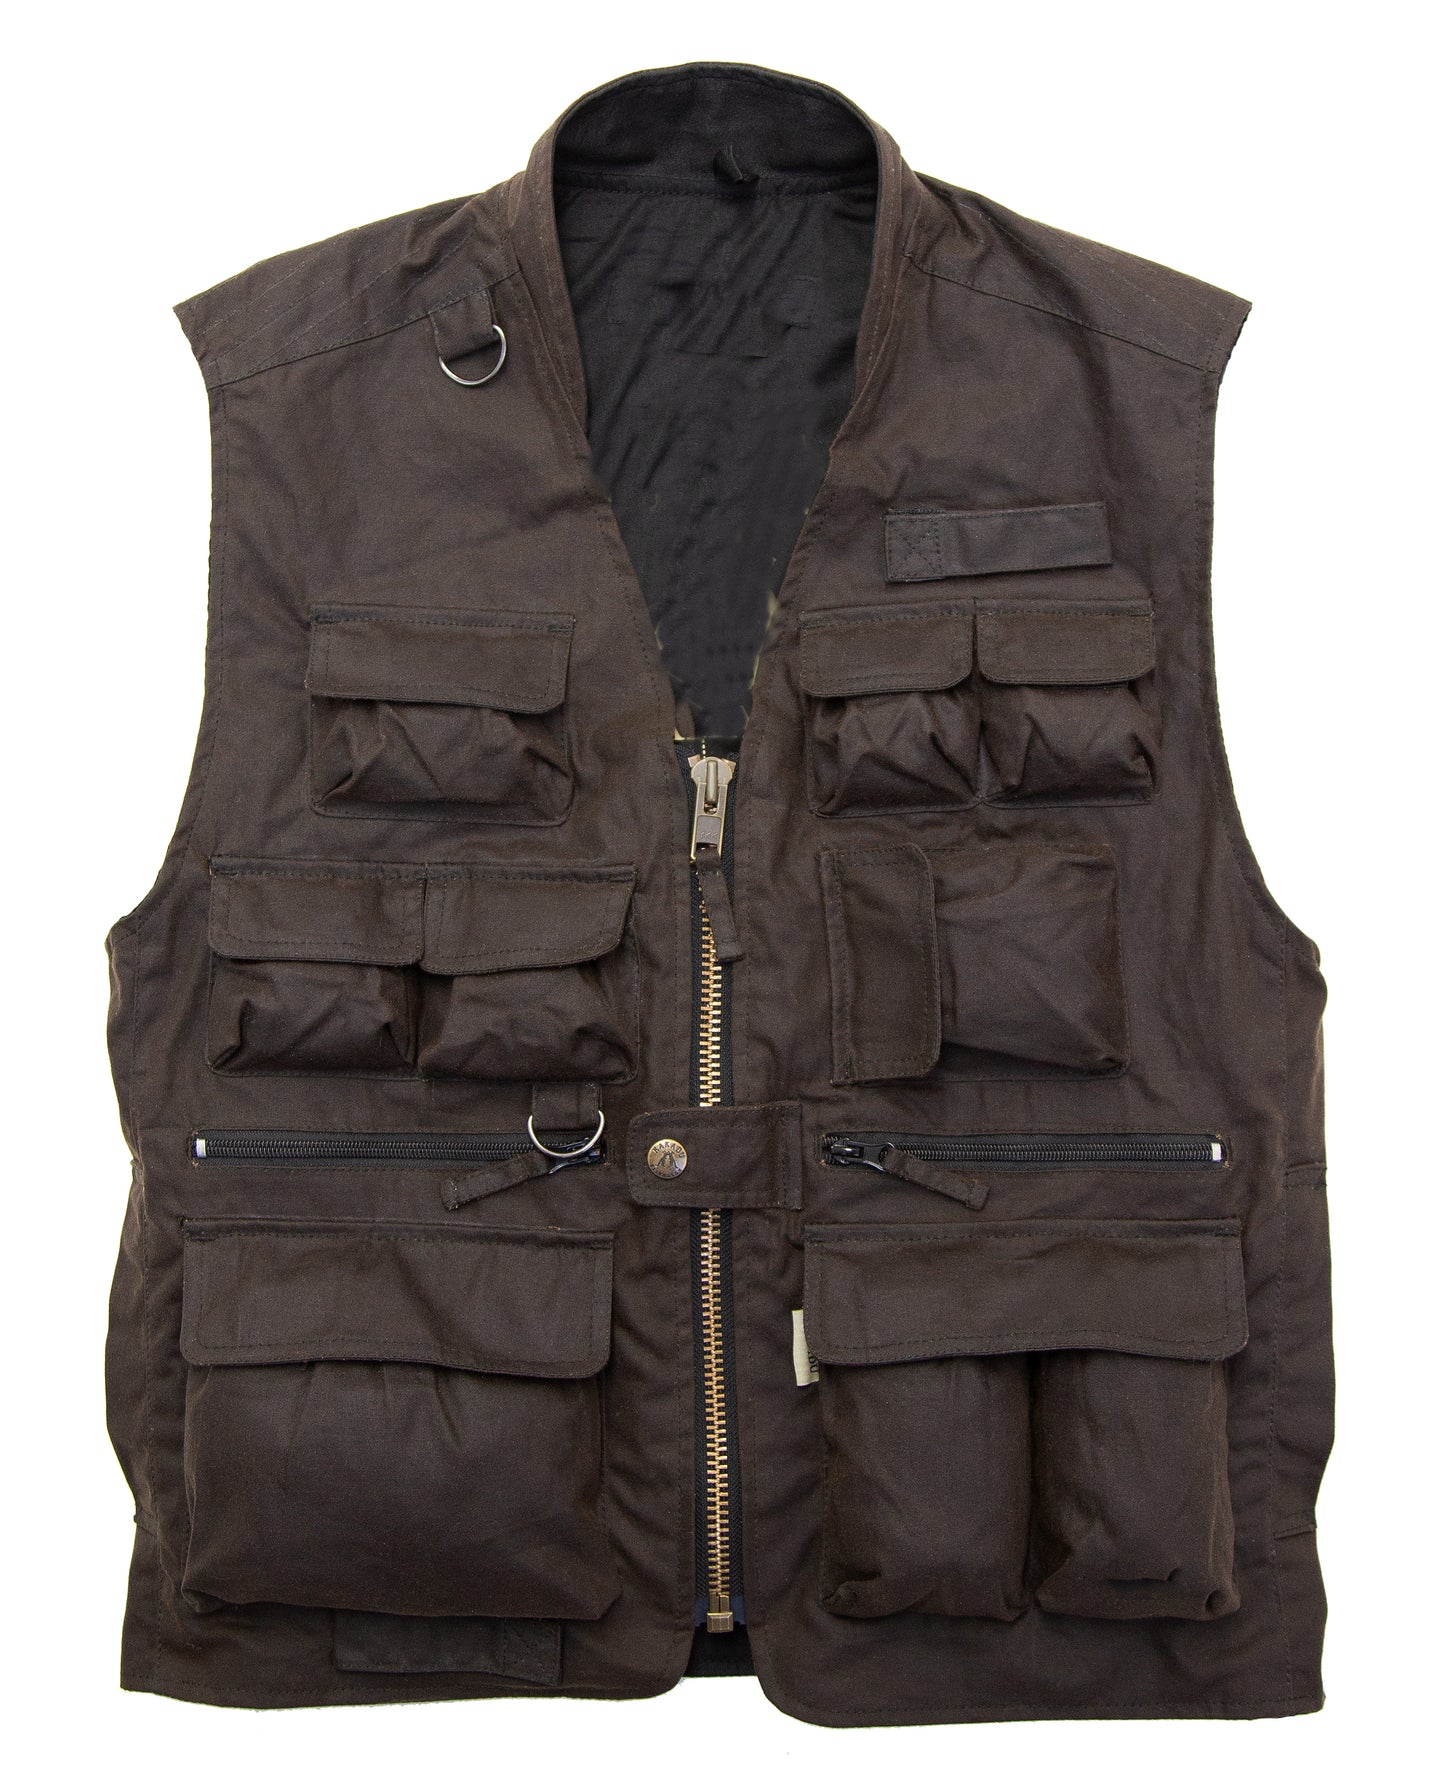 Rain-resistant outdoor vest with many bags up to size 5XL | Multifunctional with D-ring and zipper bags | brown